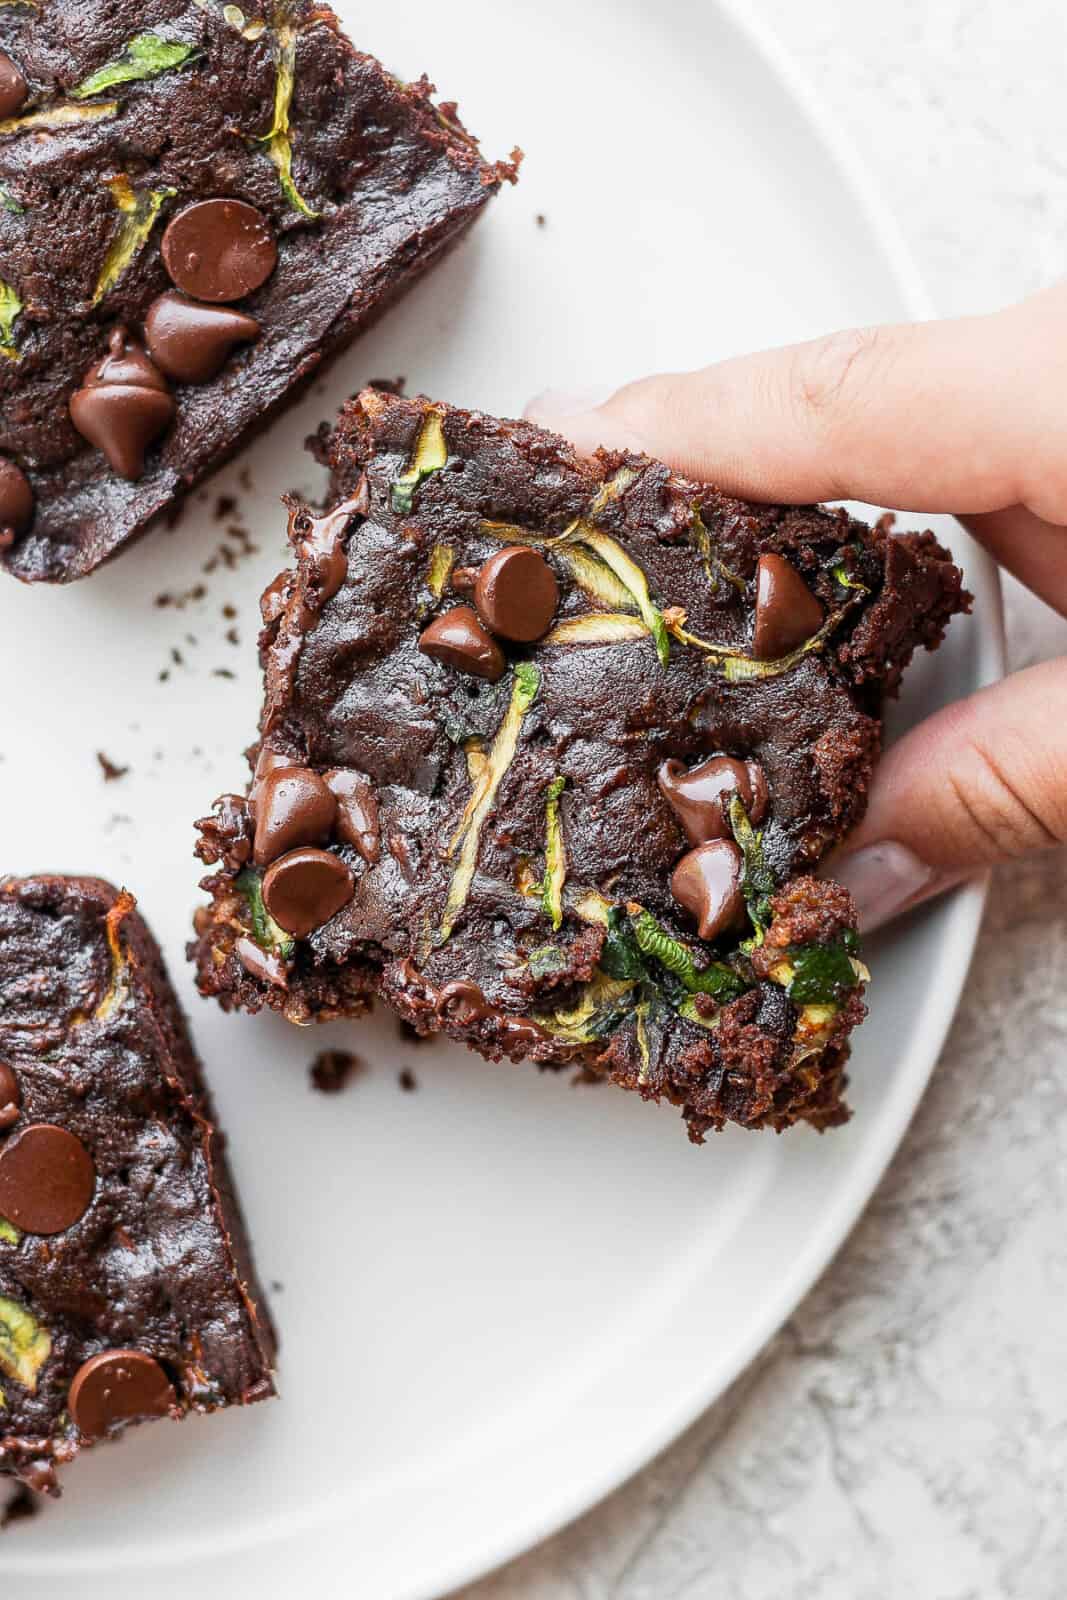 Three zucchini brownies on a plate.